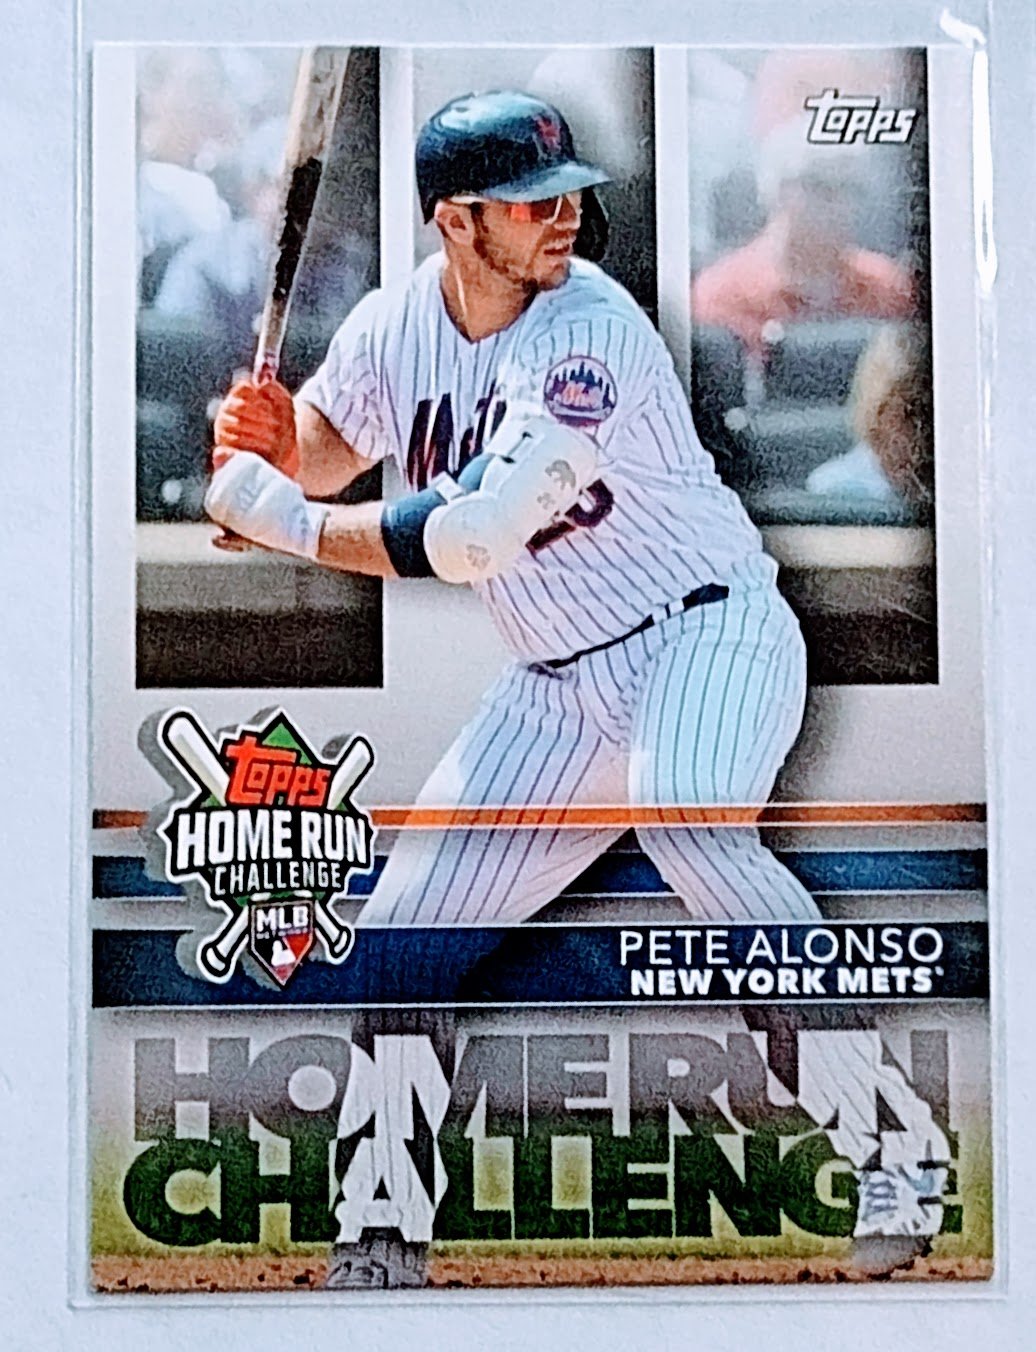 2020 Topps Pete Alonso Homerun Challenge Unscratched Promo Baseball Card TPTV simple Xclusive Collectibles   